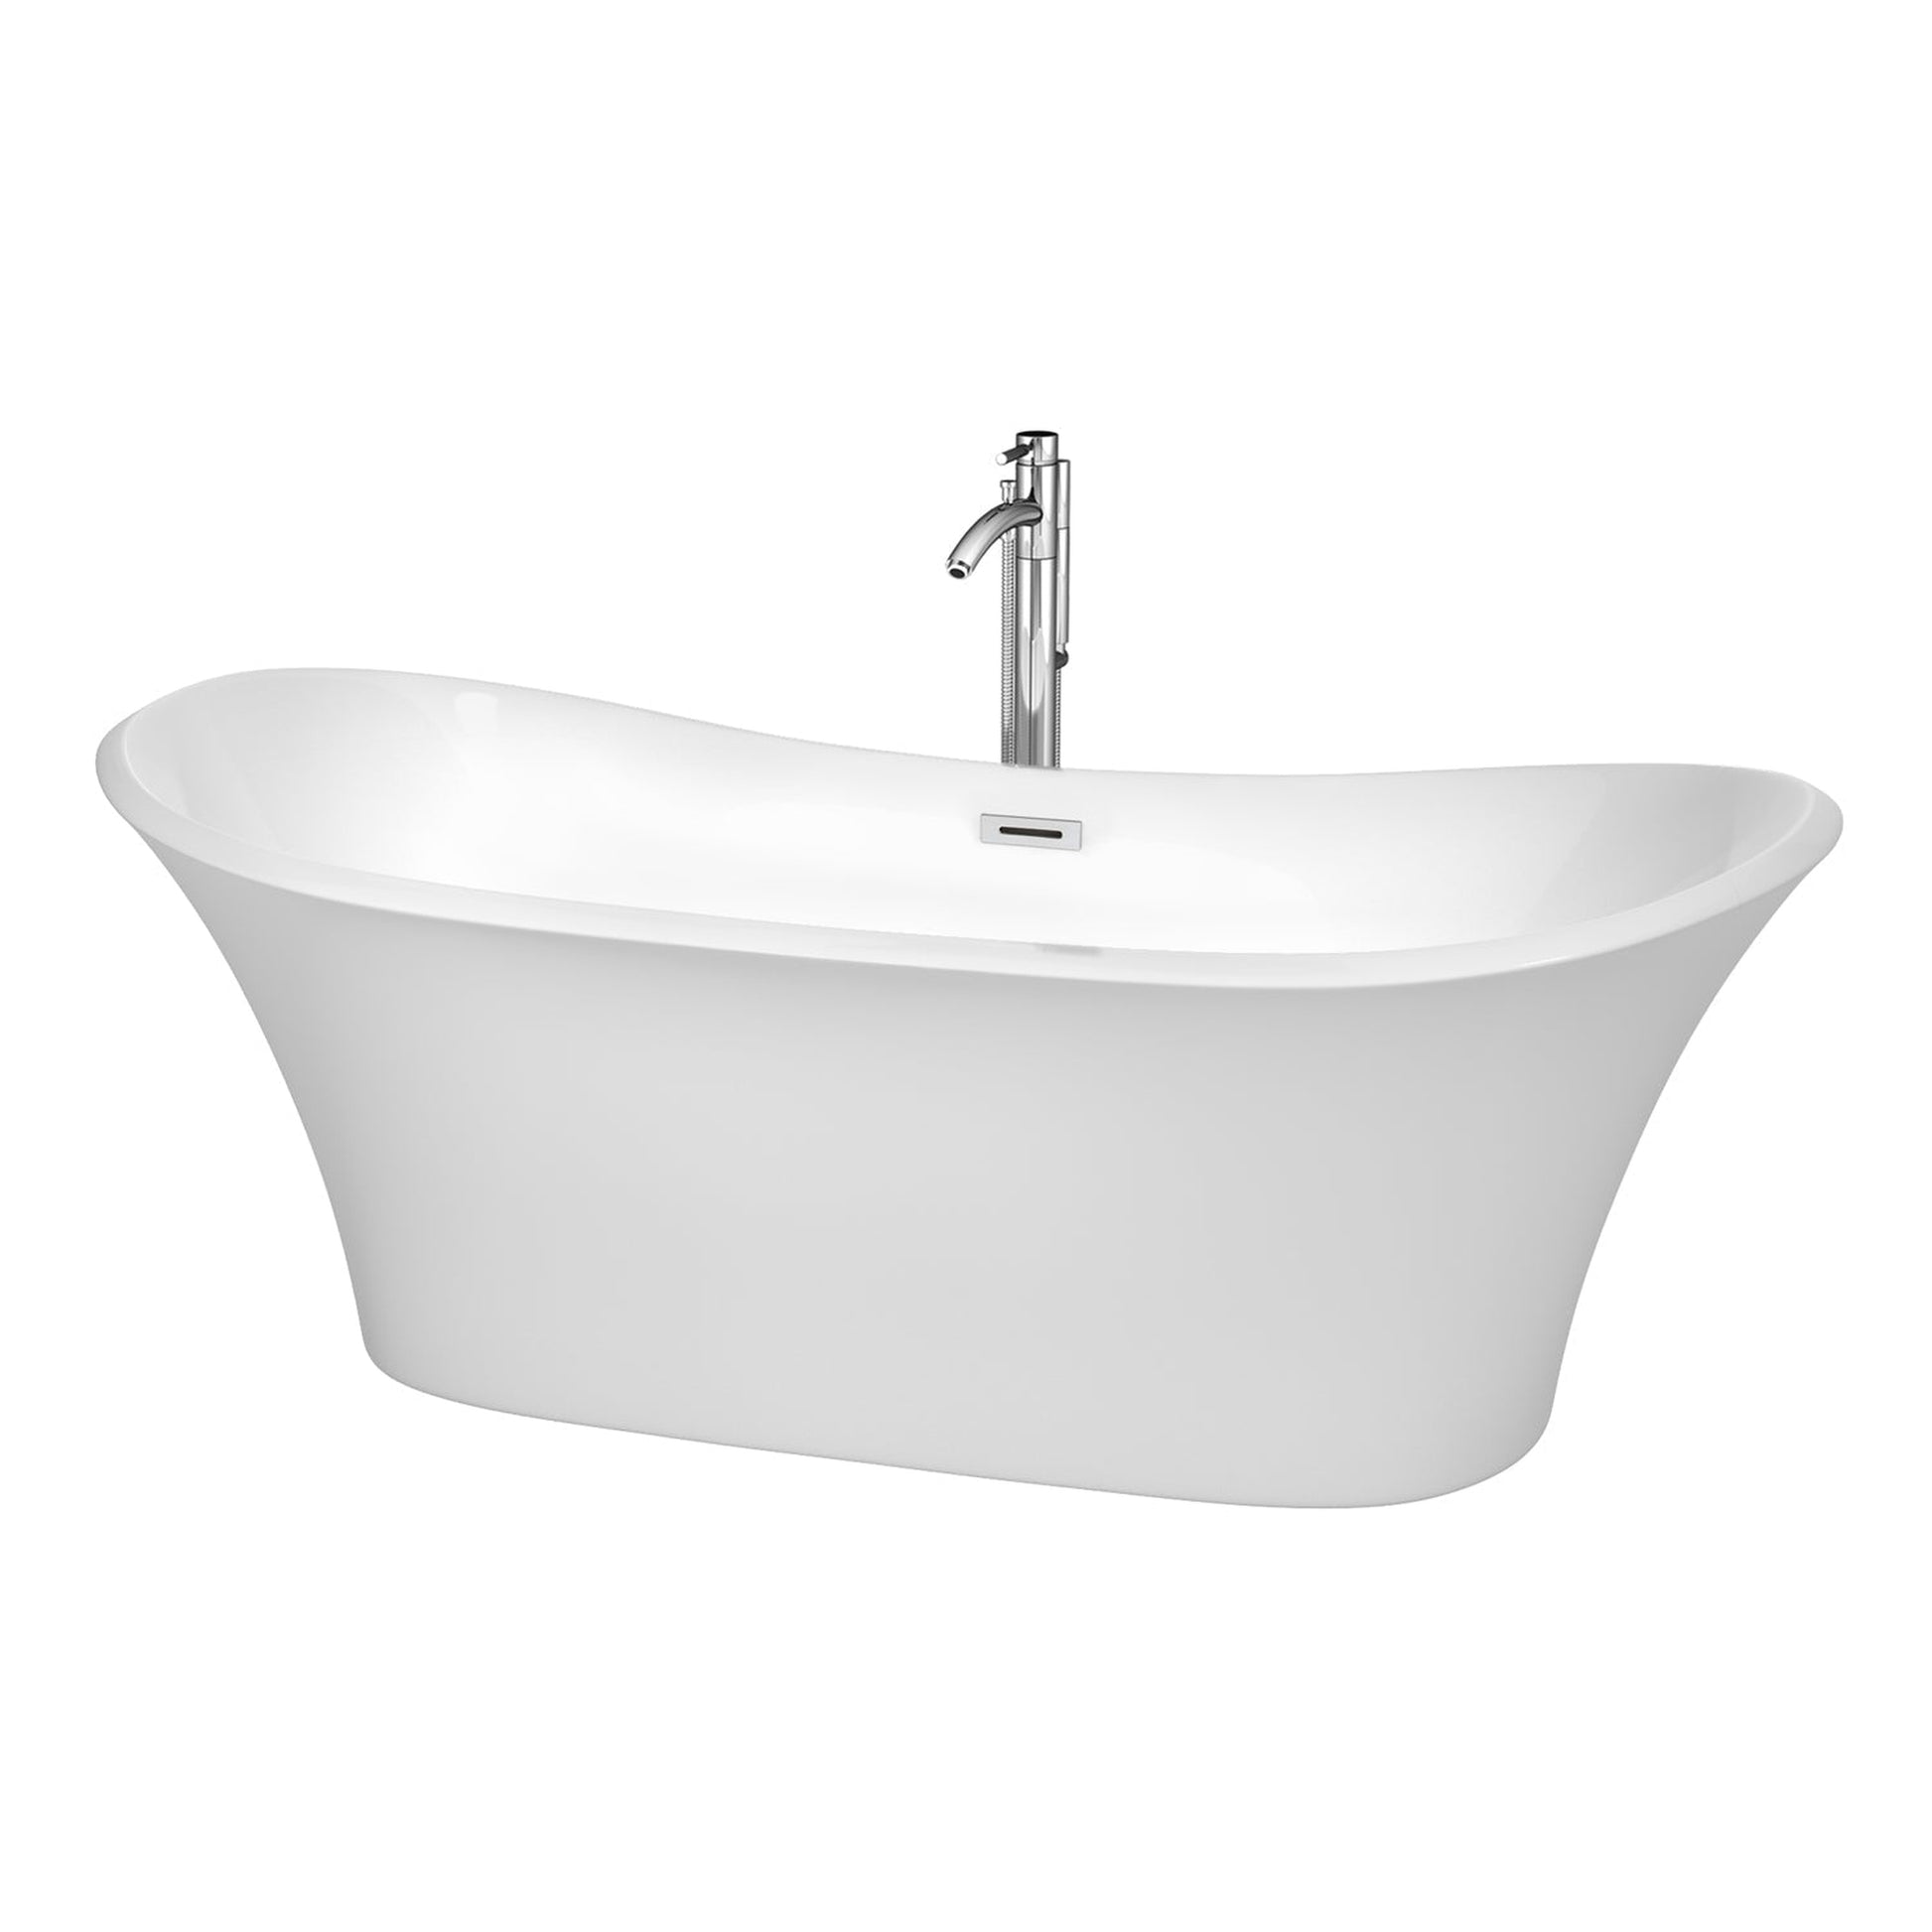 Wyndham Collection Bolera 71" Freestanding Bathtub in White With Floor Mounted Faucet, Drain and Overflow Trim in Brushed Nickel